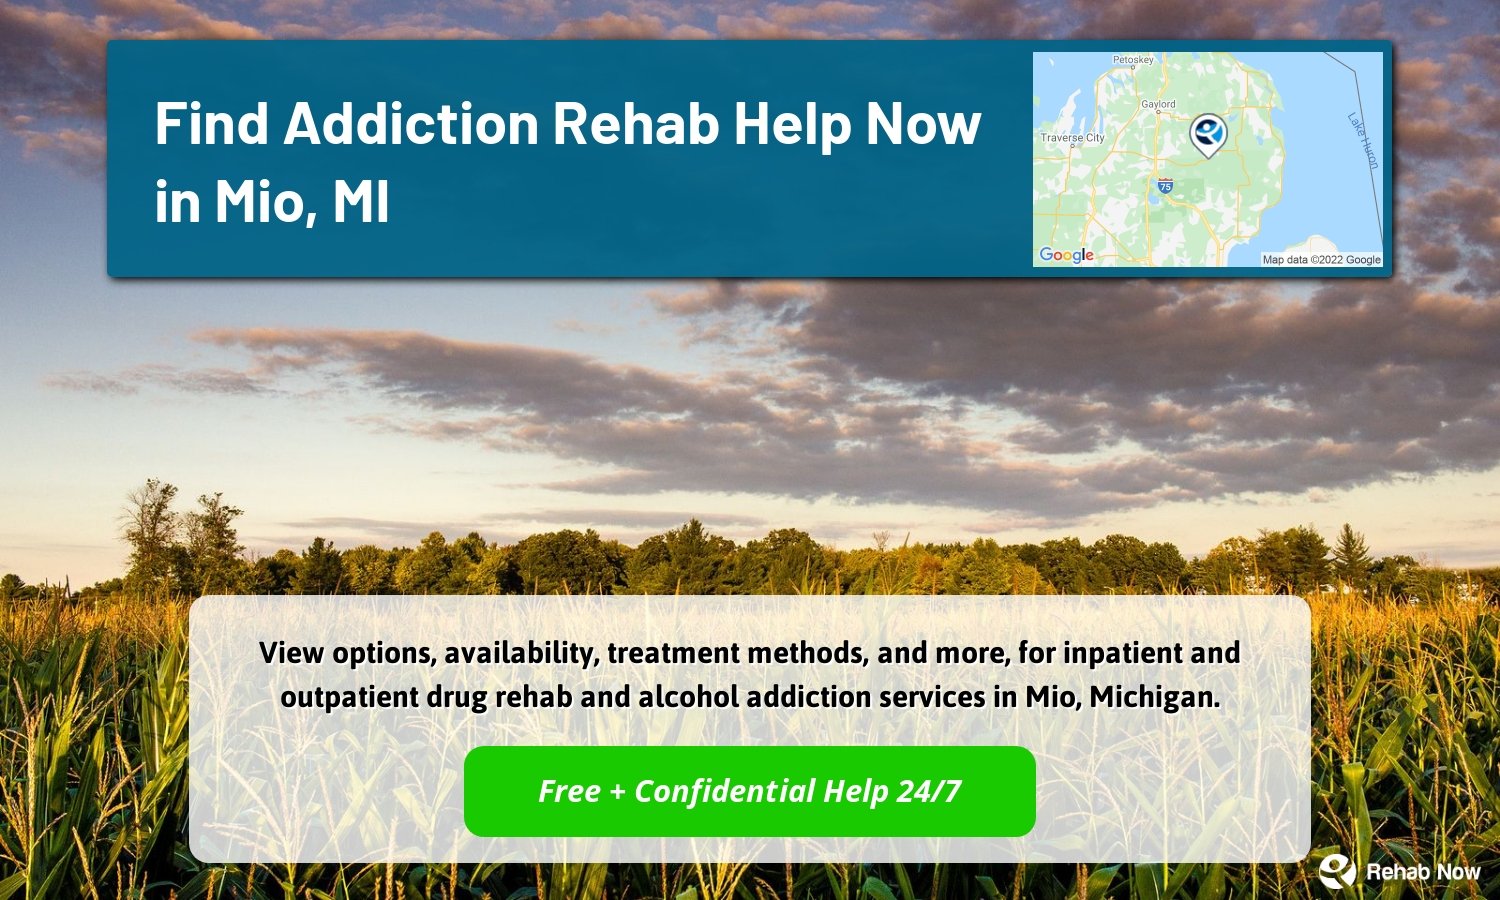 View options, availability, treatment methods, and more, for inpatient and outpatient drug rehab and alcohol addiction services in Mio, Michigan.